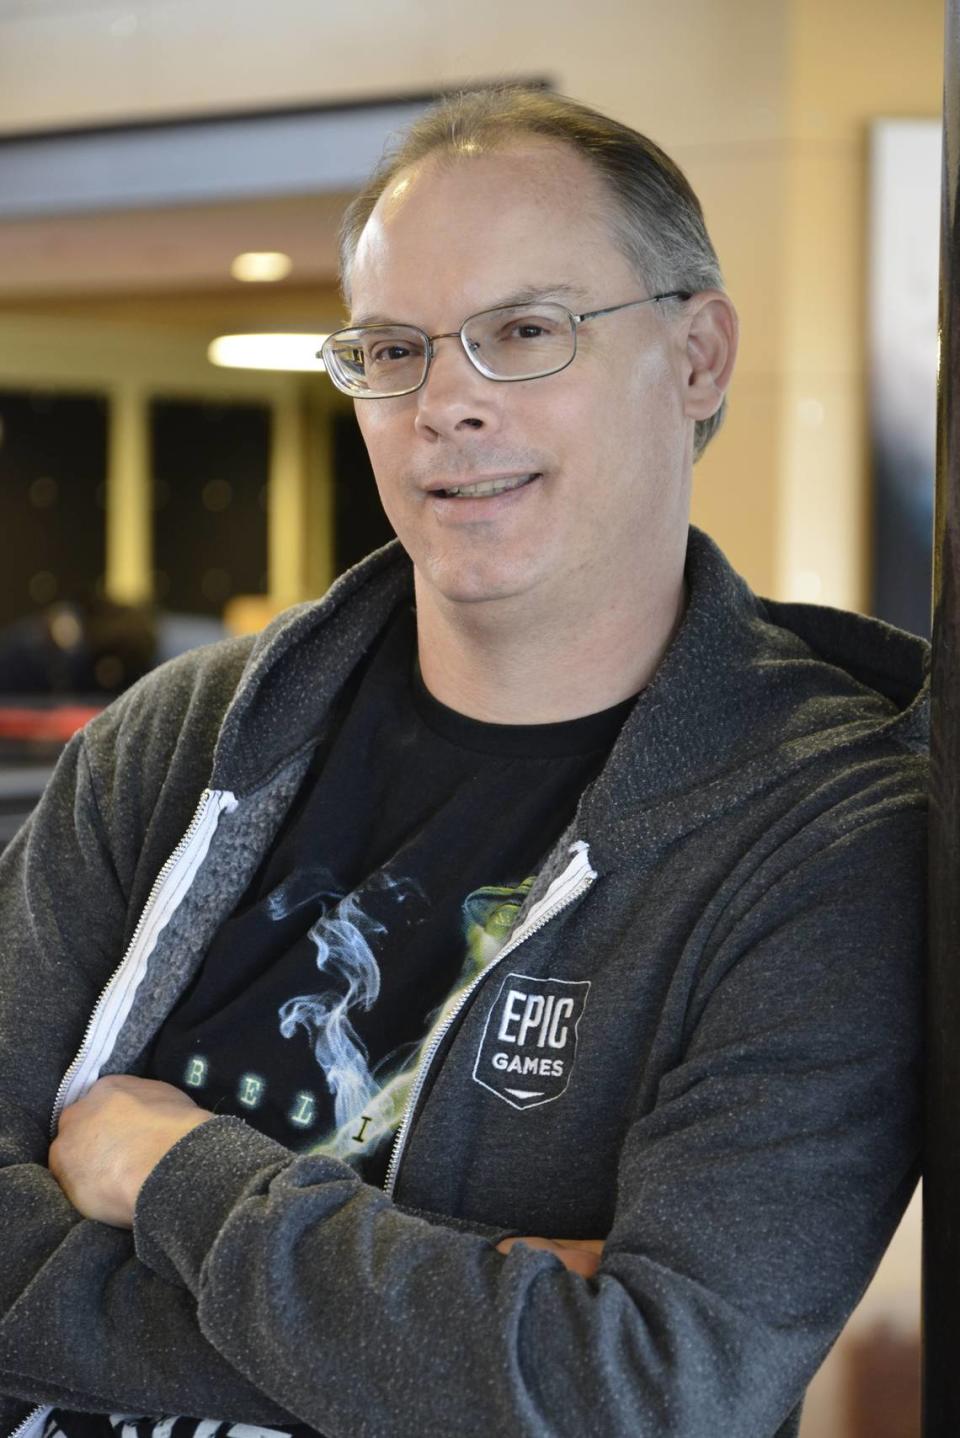 Tim Sweeney, the founder and CEO of Epic Games, has created a huge economic impact in the Triangle since moving his company to the area in the 1990s.